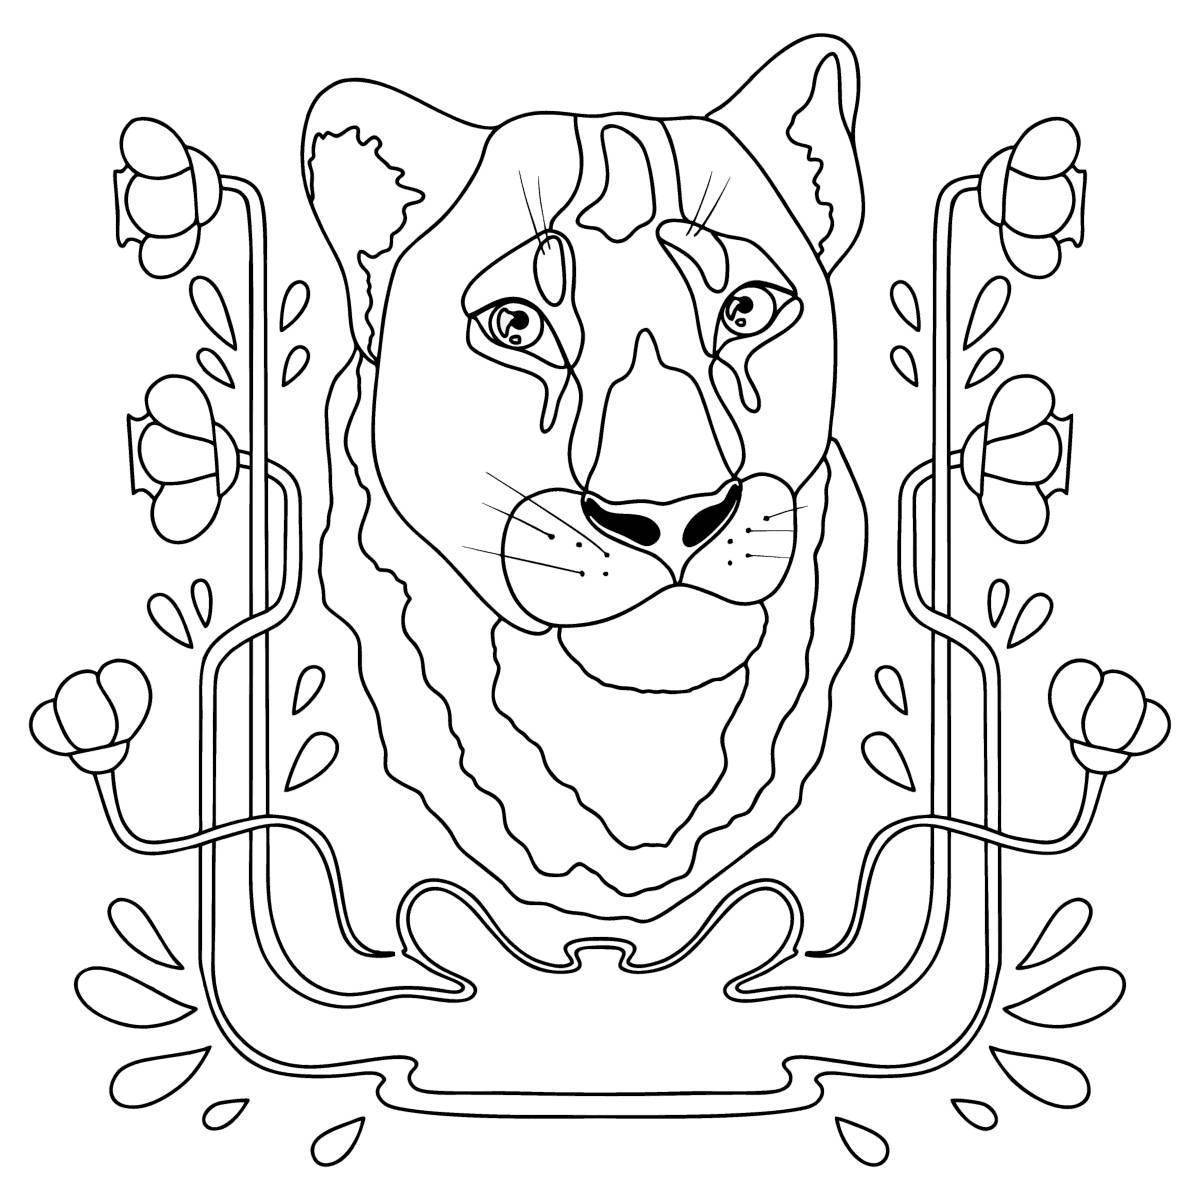 Great lion coloring book for 6-7 year olds